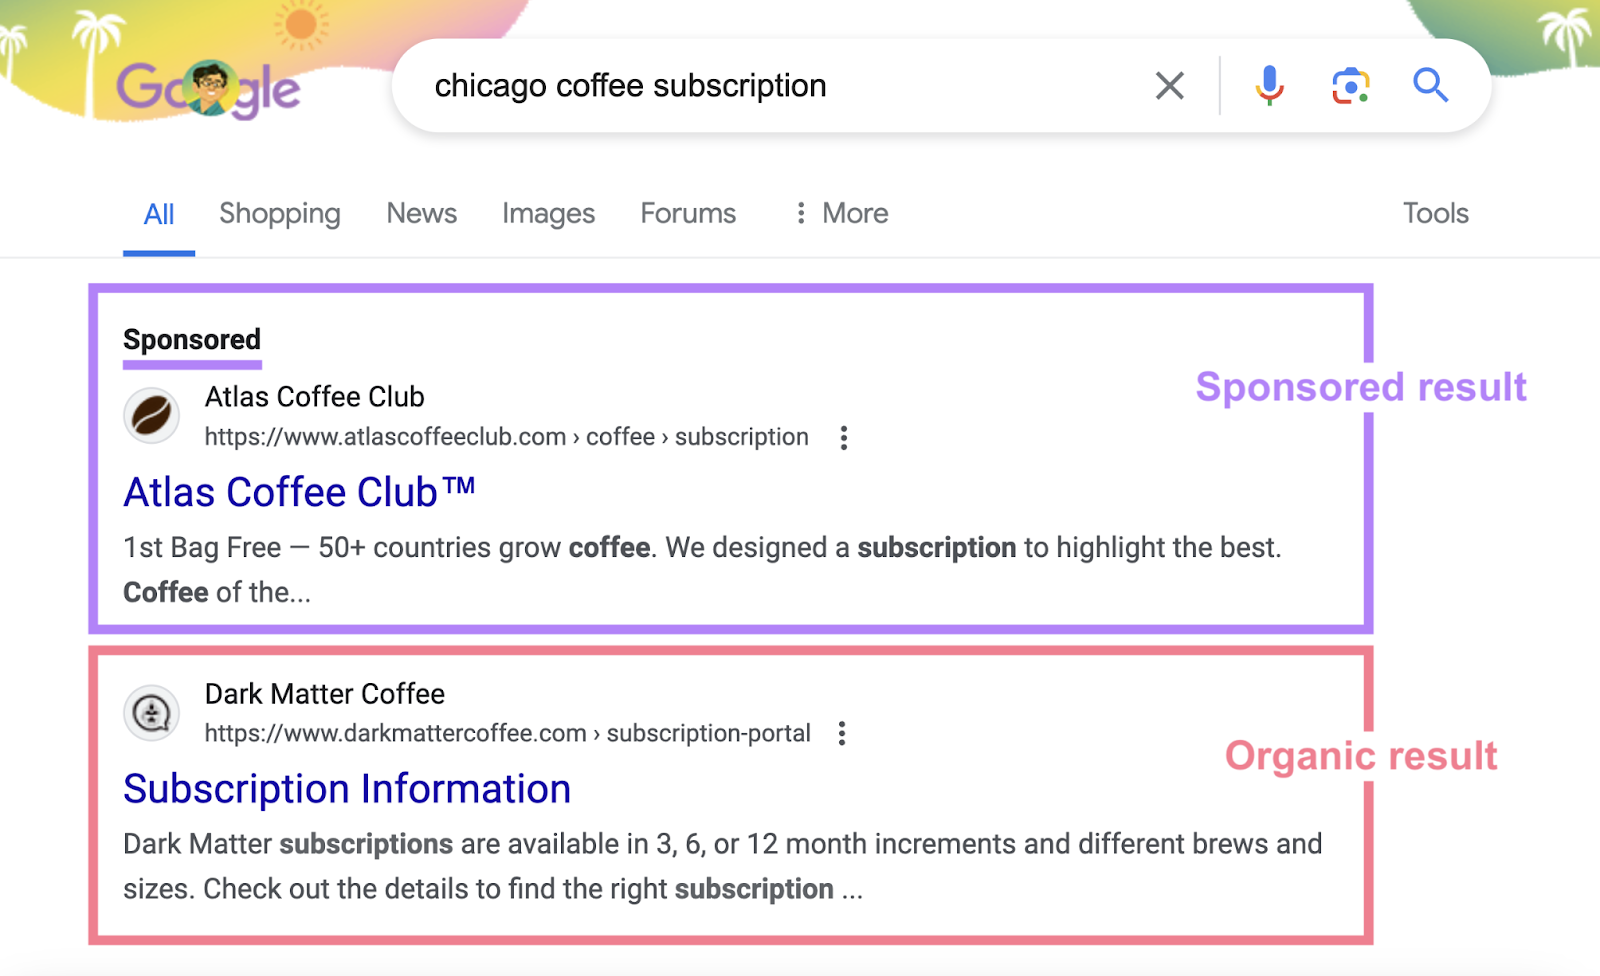 search for "chicago coffee subsciption" shows a sponsored, paid result for a coffee club and an organic, unpaid result for chicago coffee brand Dark Matter Coffee